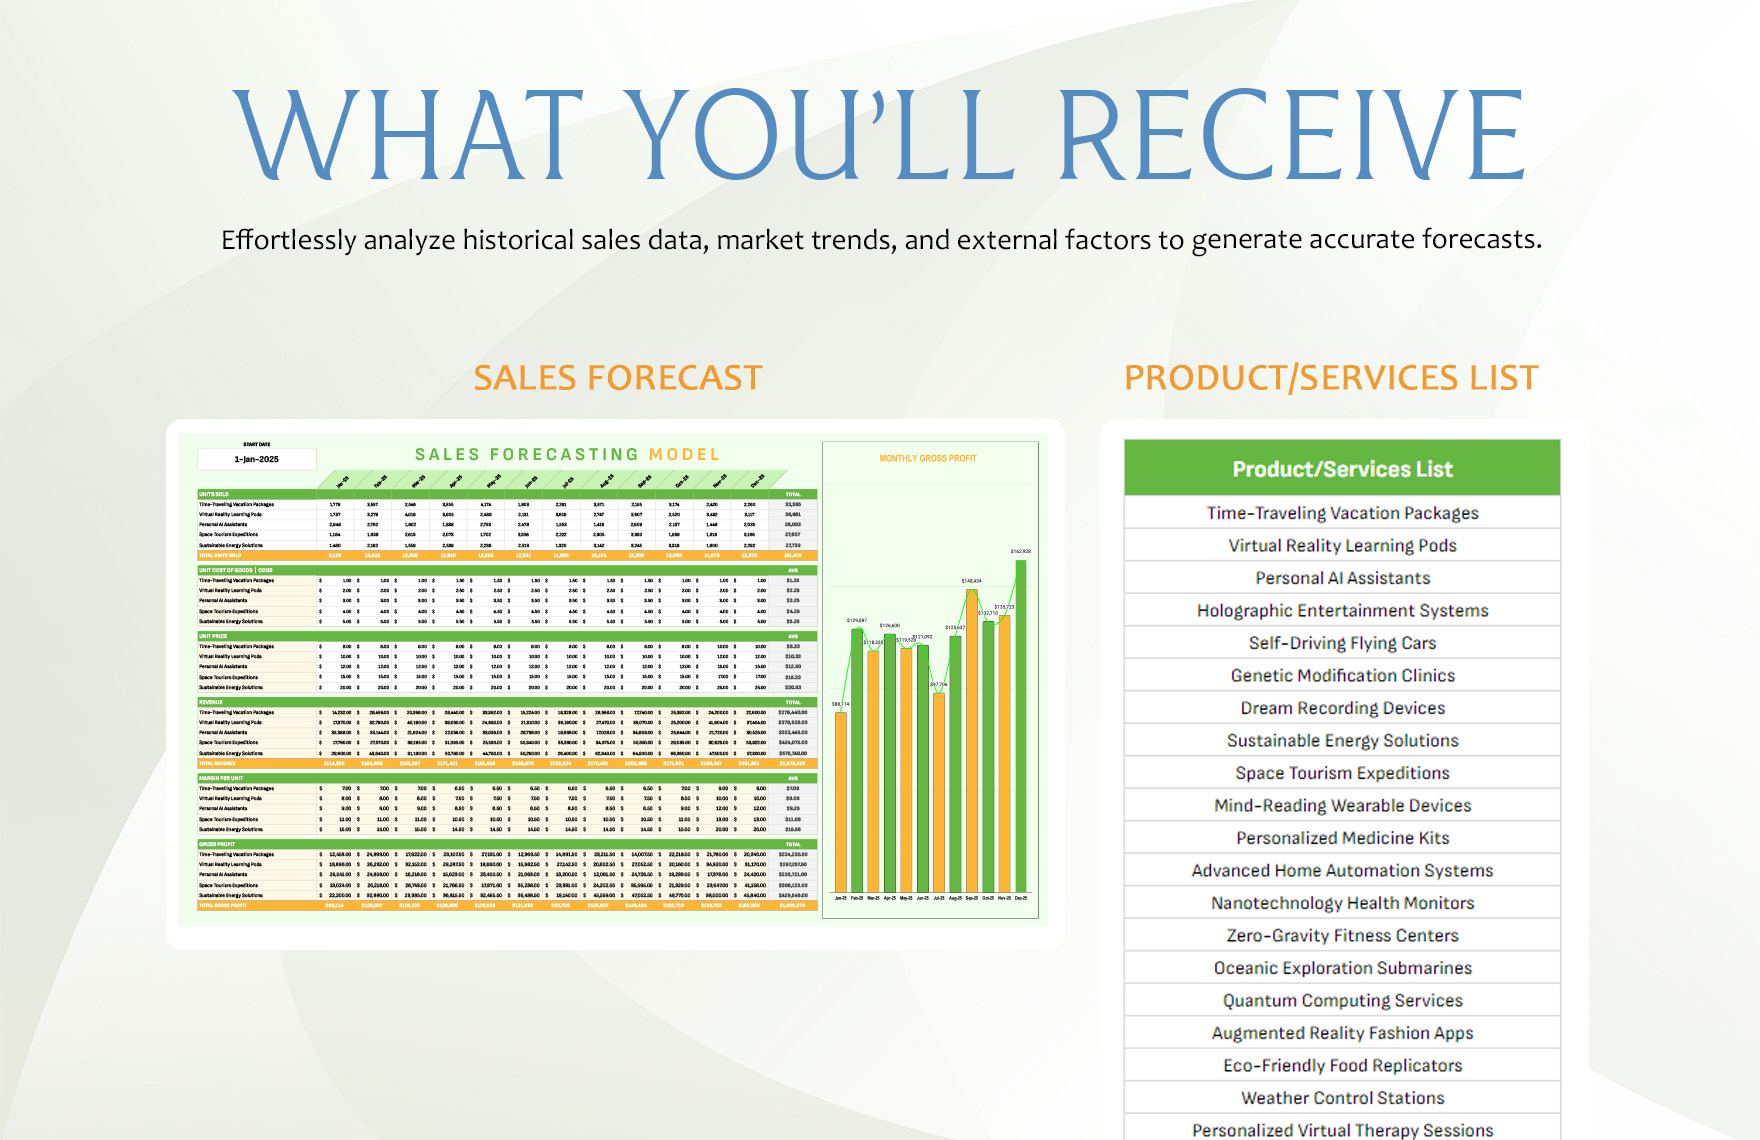 Sales Forecasting Model Template